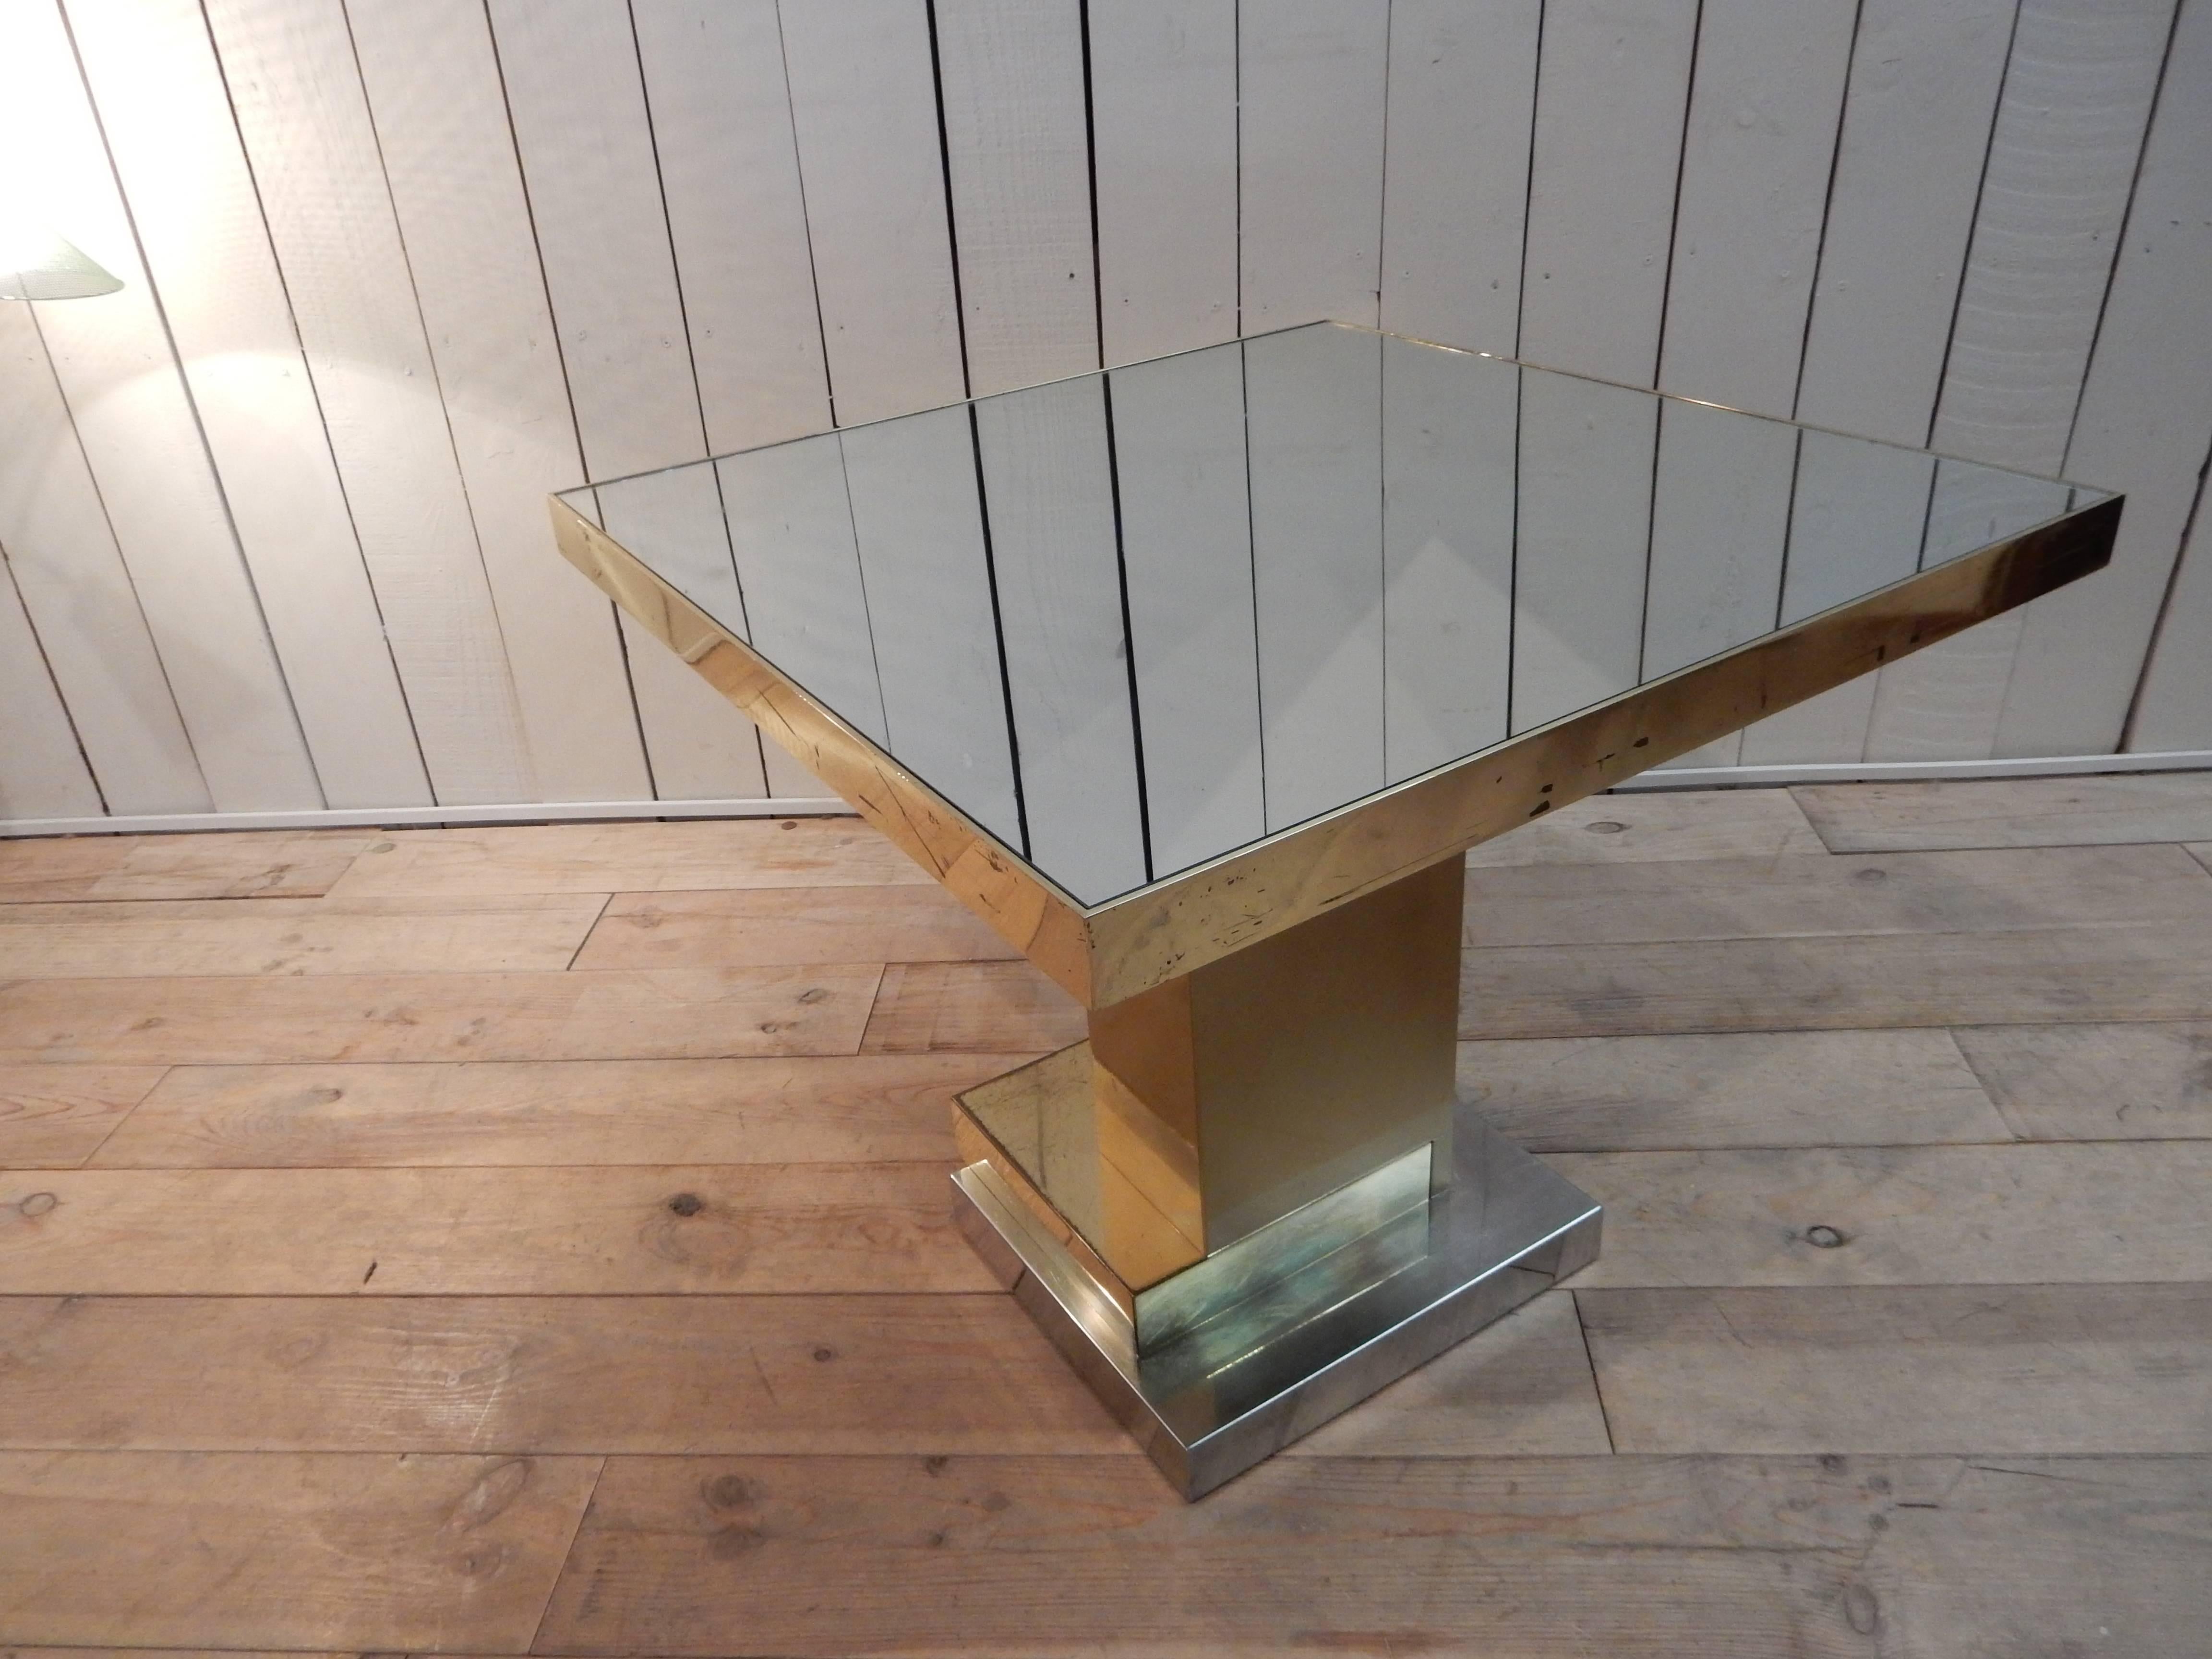 A very nice and decorative table made of brass, steel and glass, circa 1970.